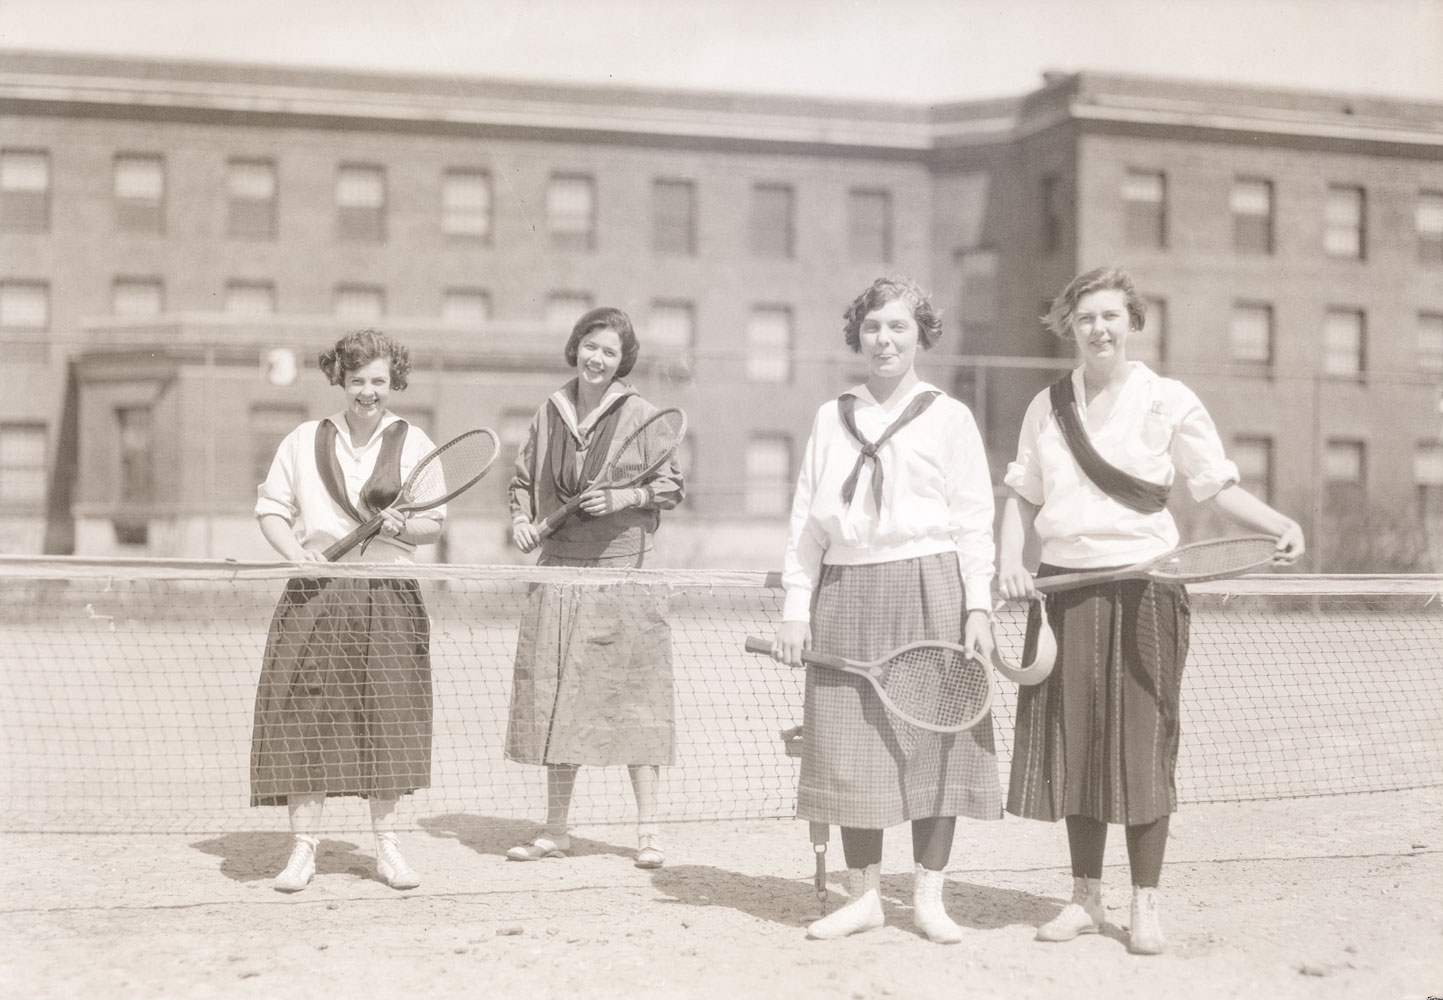 A black and white image of four women holding tennis rackets